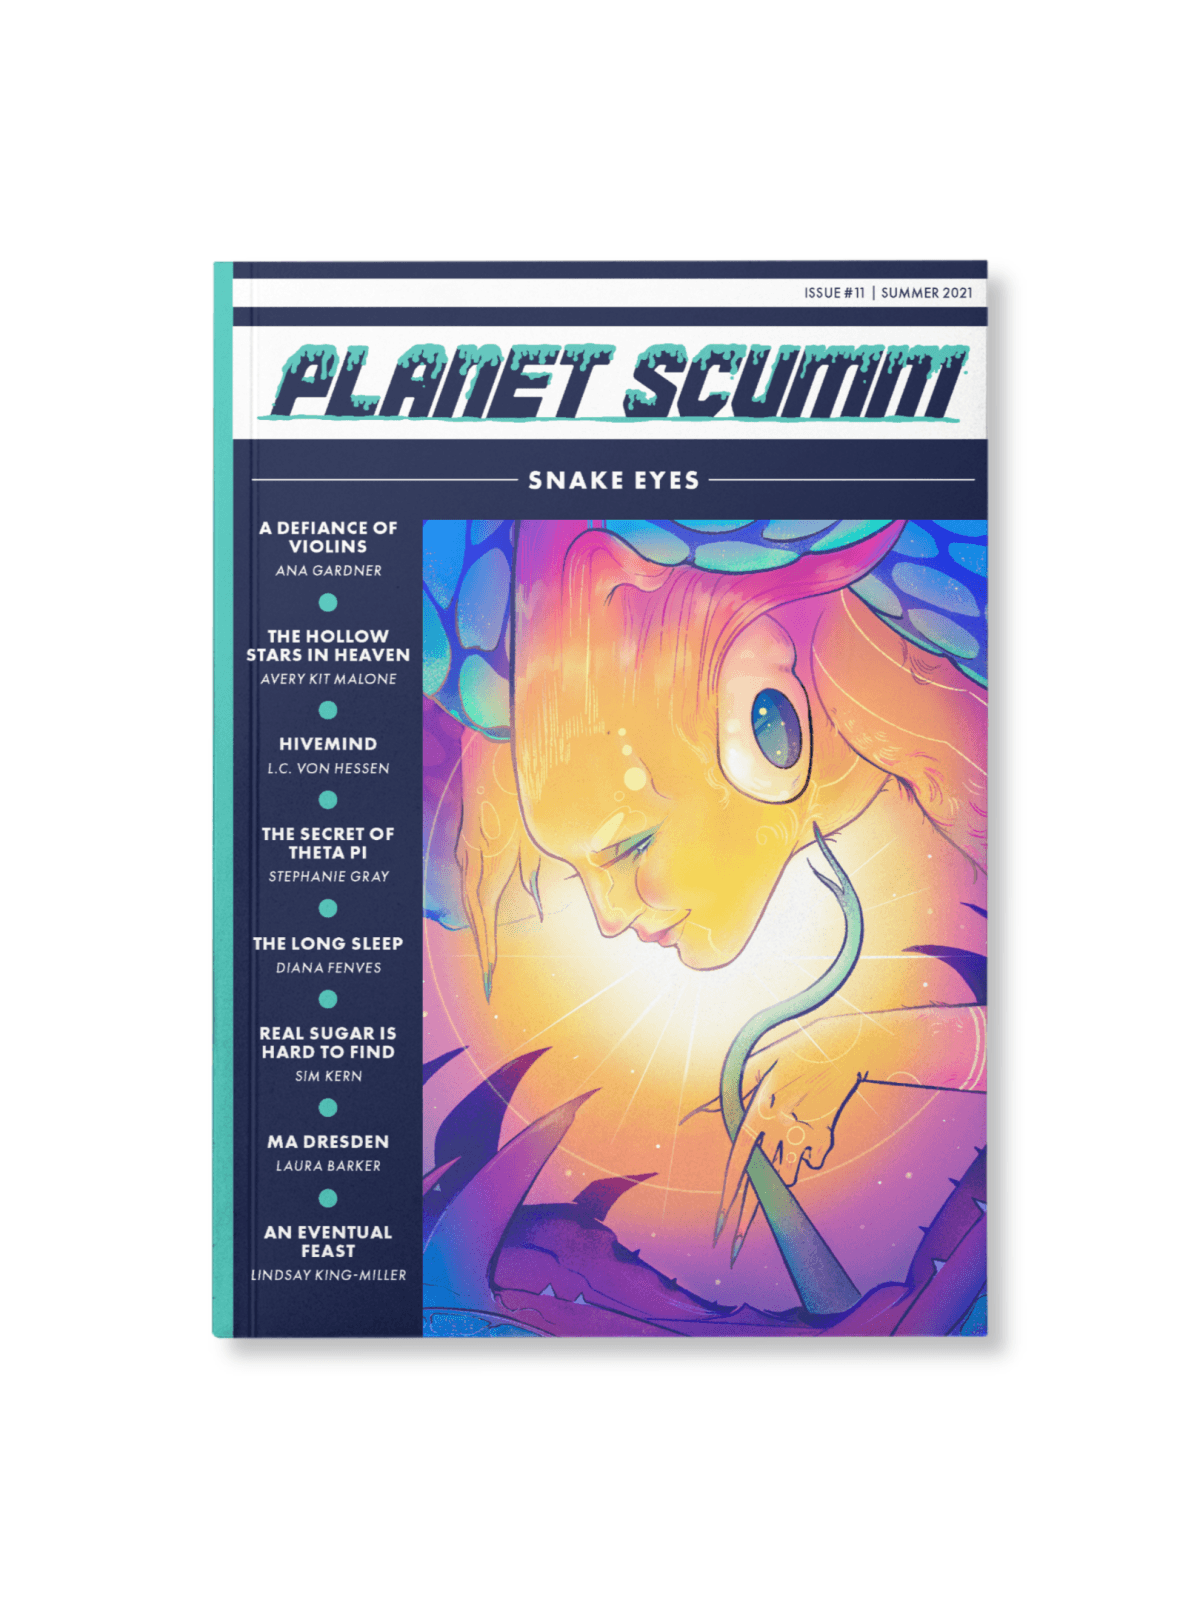 Planet Scumm #11: Snake Eyes (Summer 2021) - The Fourth Place